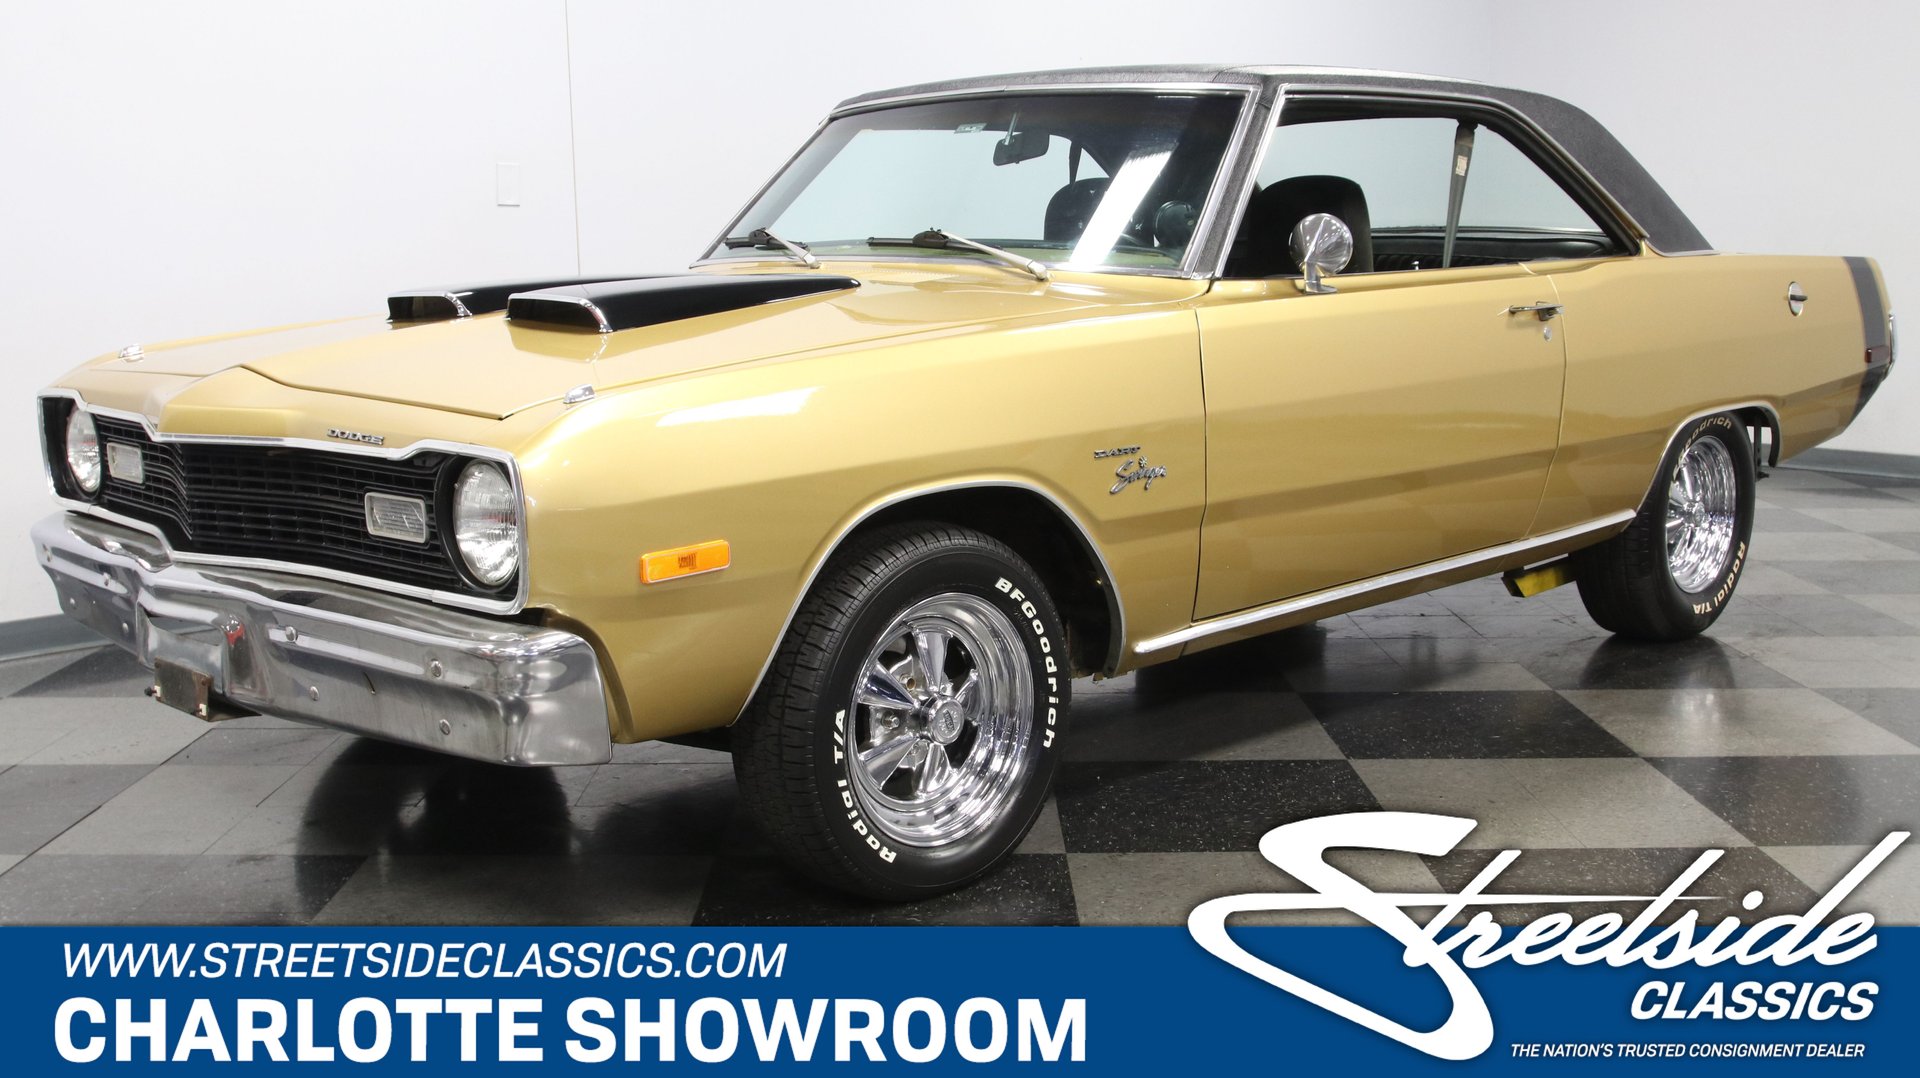 1973 Dodge Dart Classic Cars for Sale